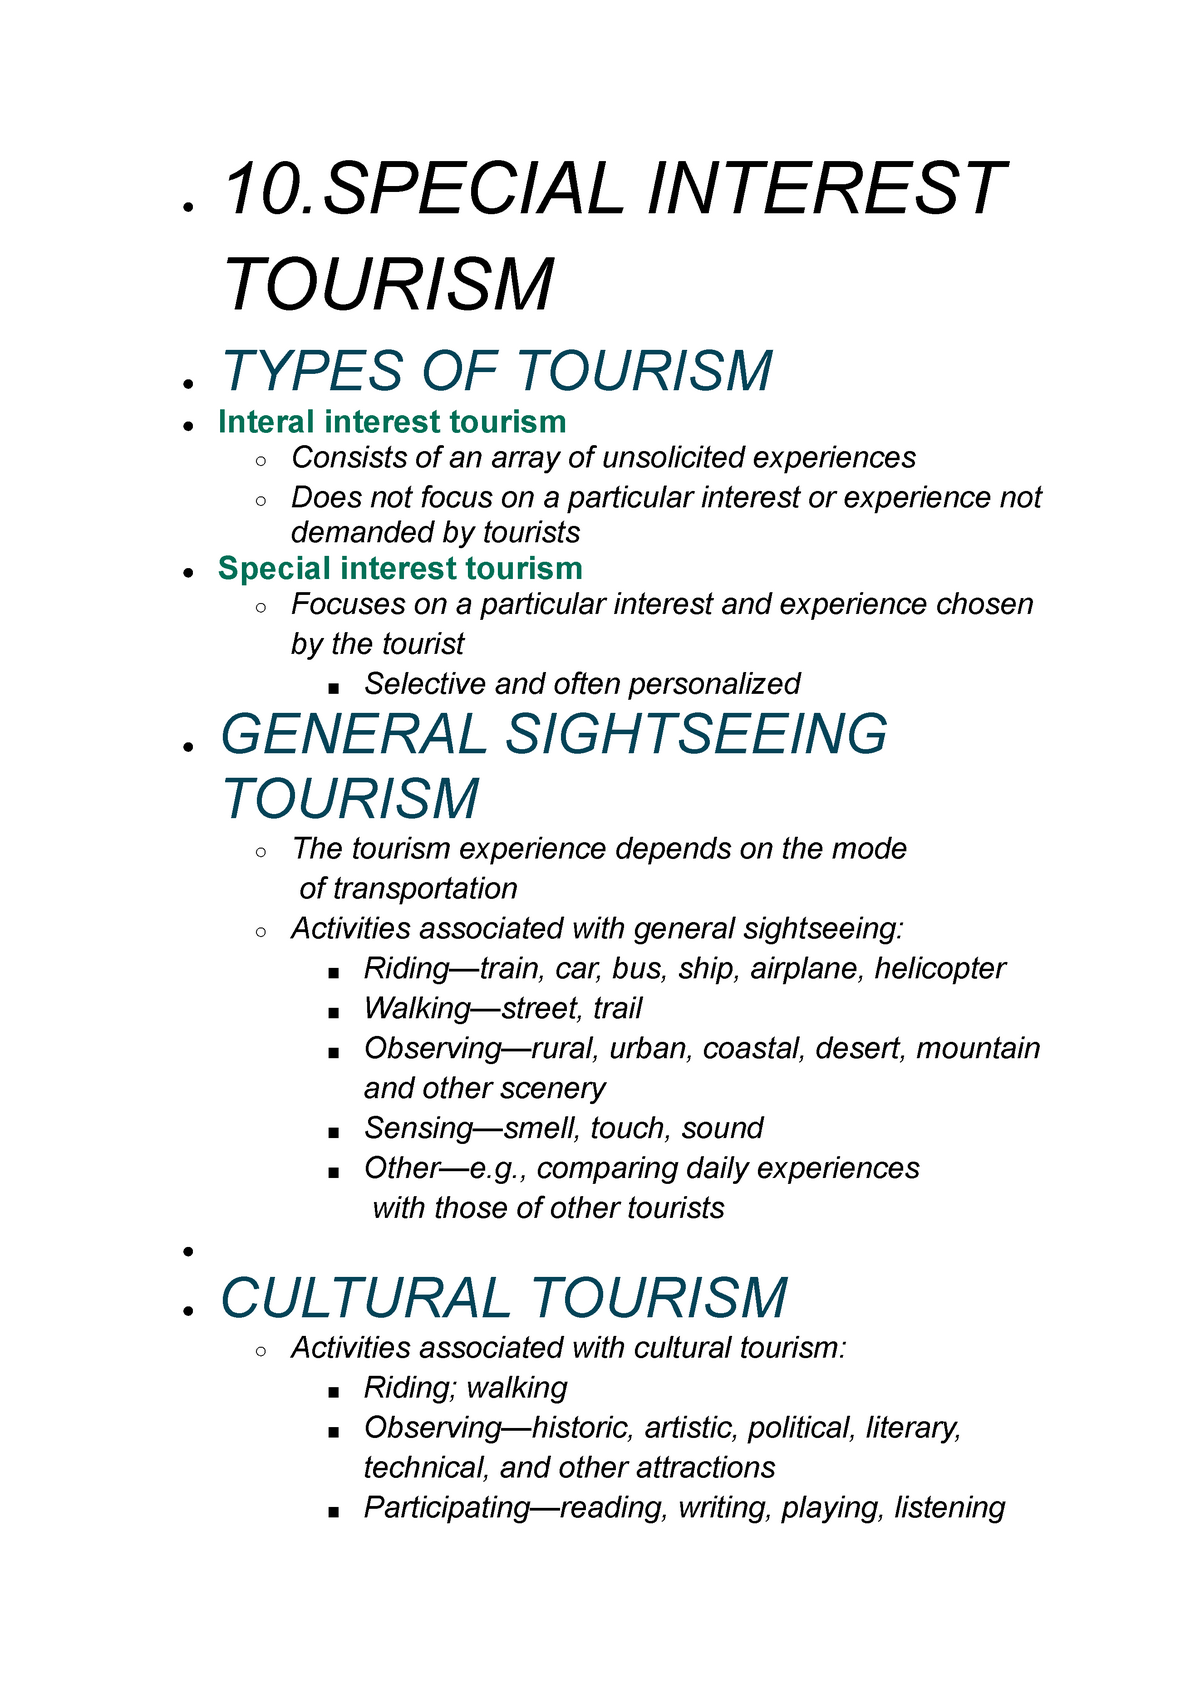 difference between special interest tourism